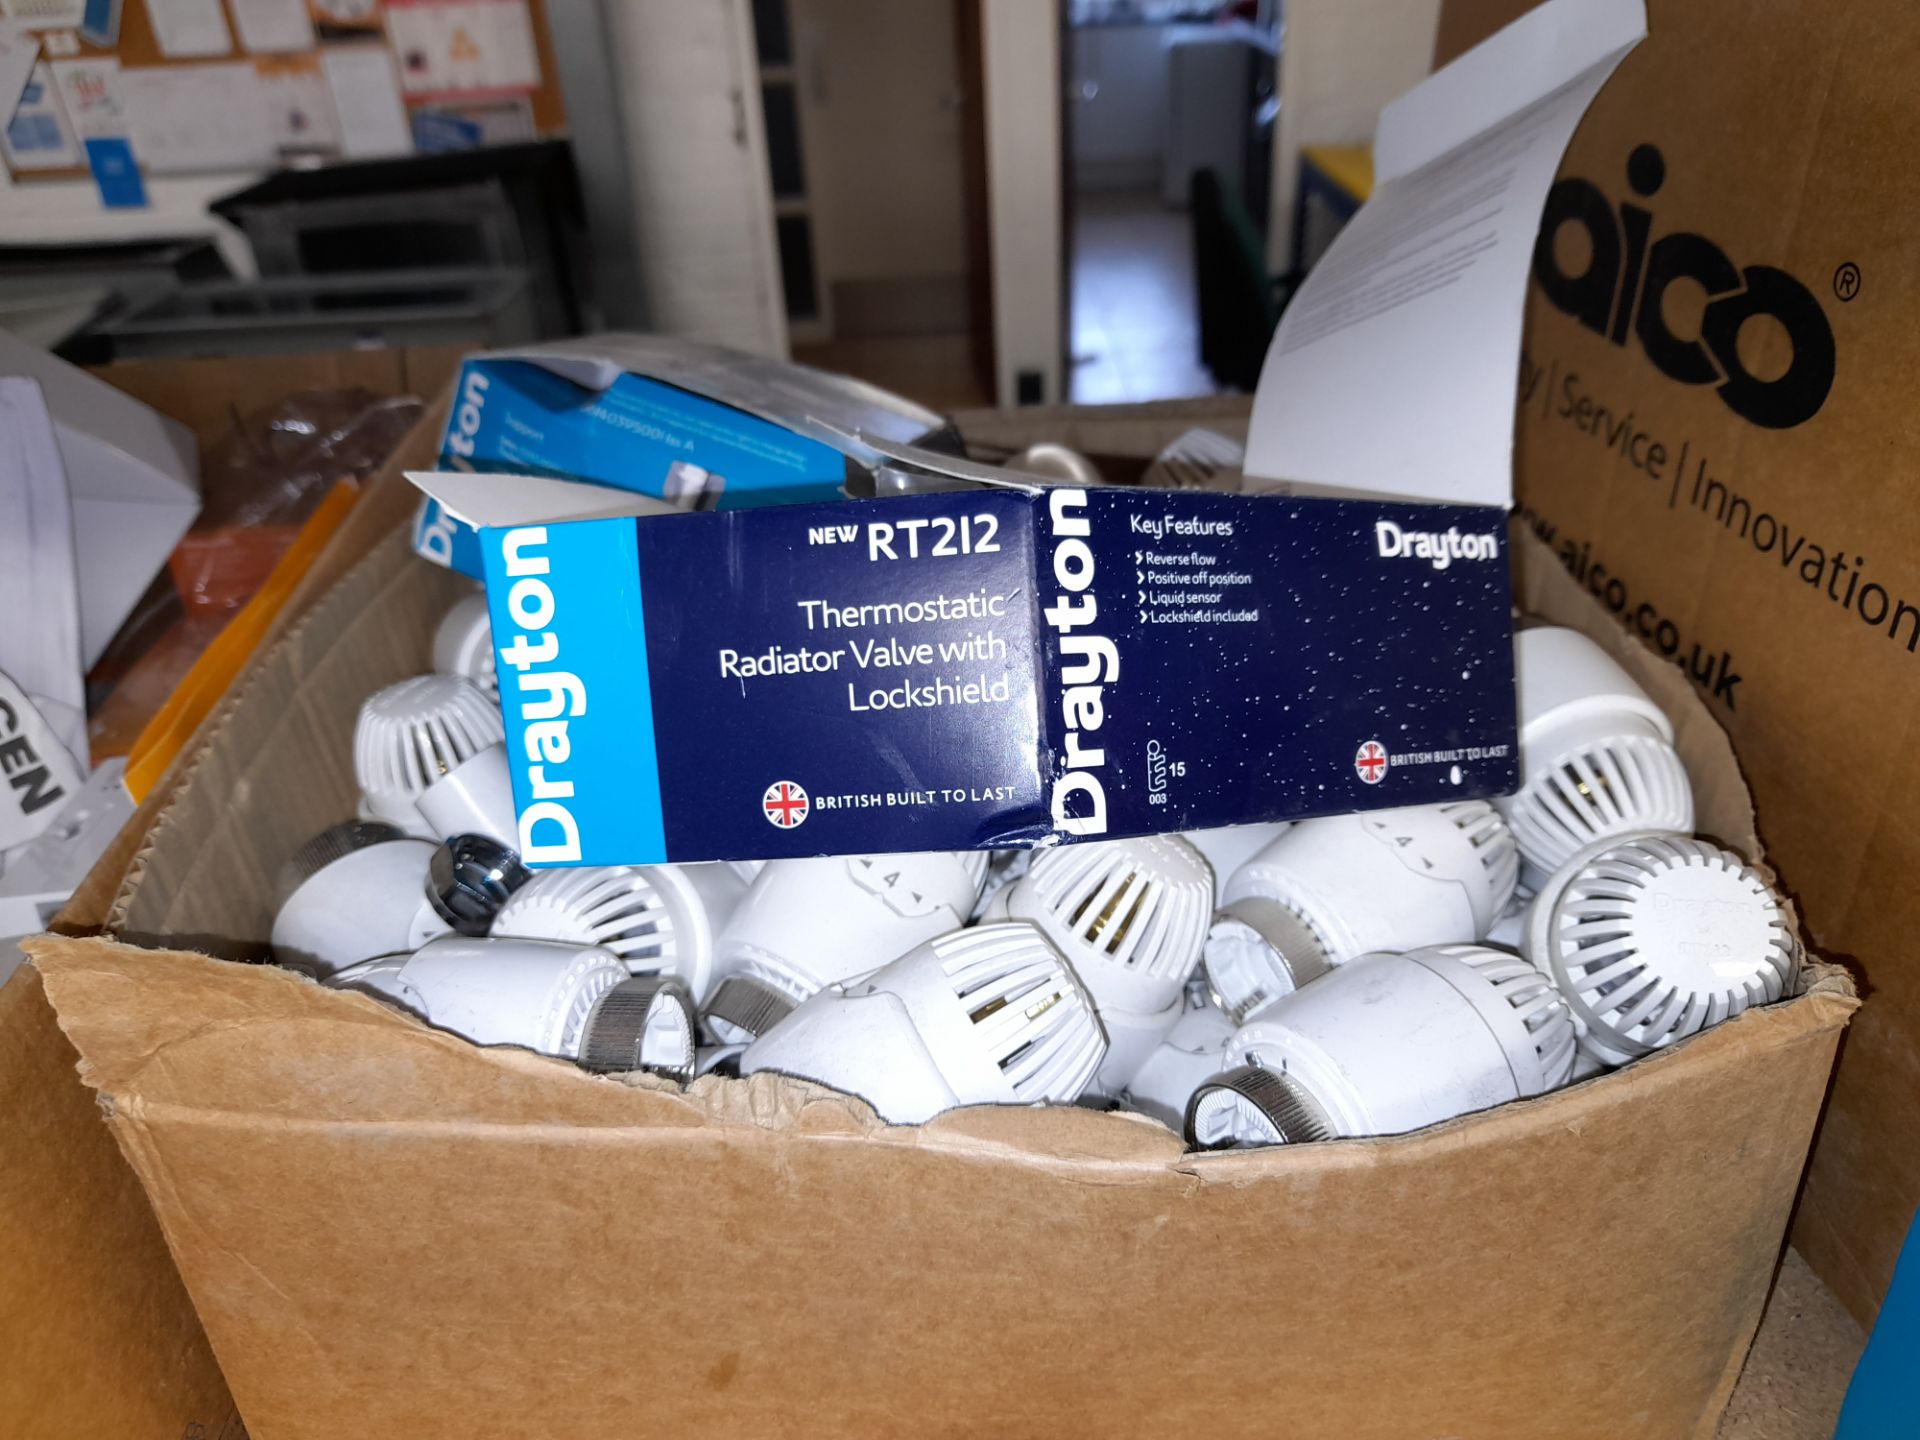 2 x boxes of Drayton RT212 Thermostatic Radiator valves & 1 x box of Heatmister Neo air control - Image 3 of 5